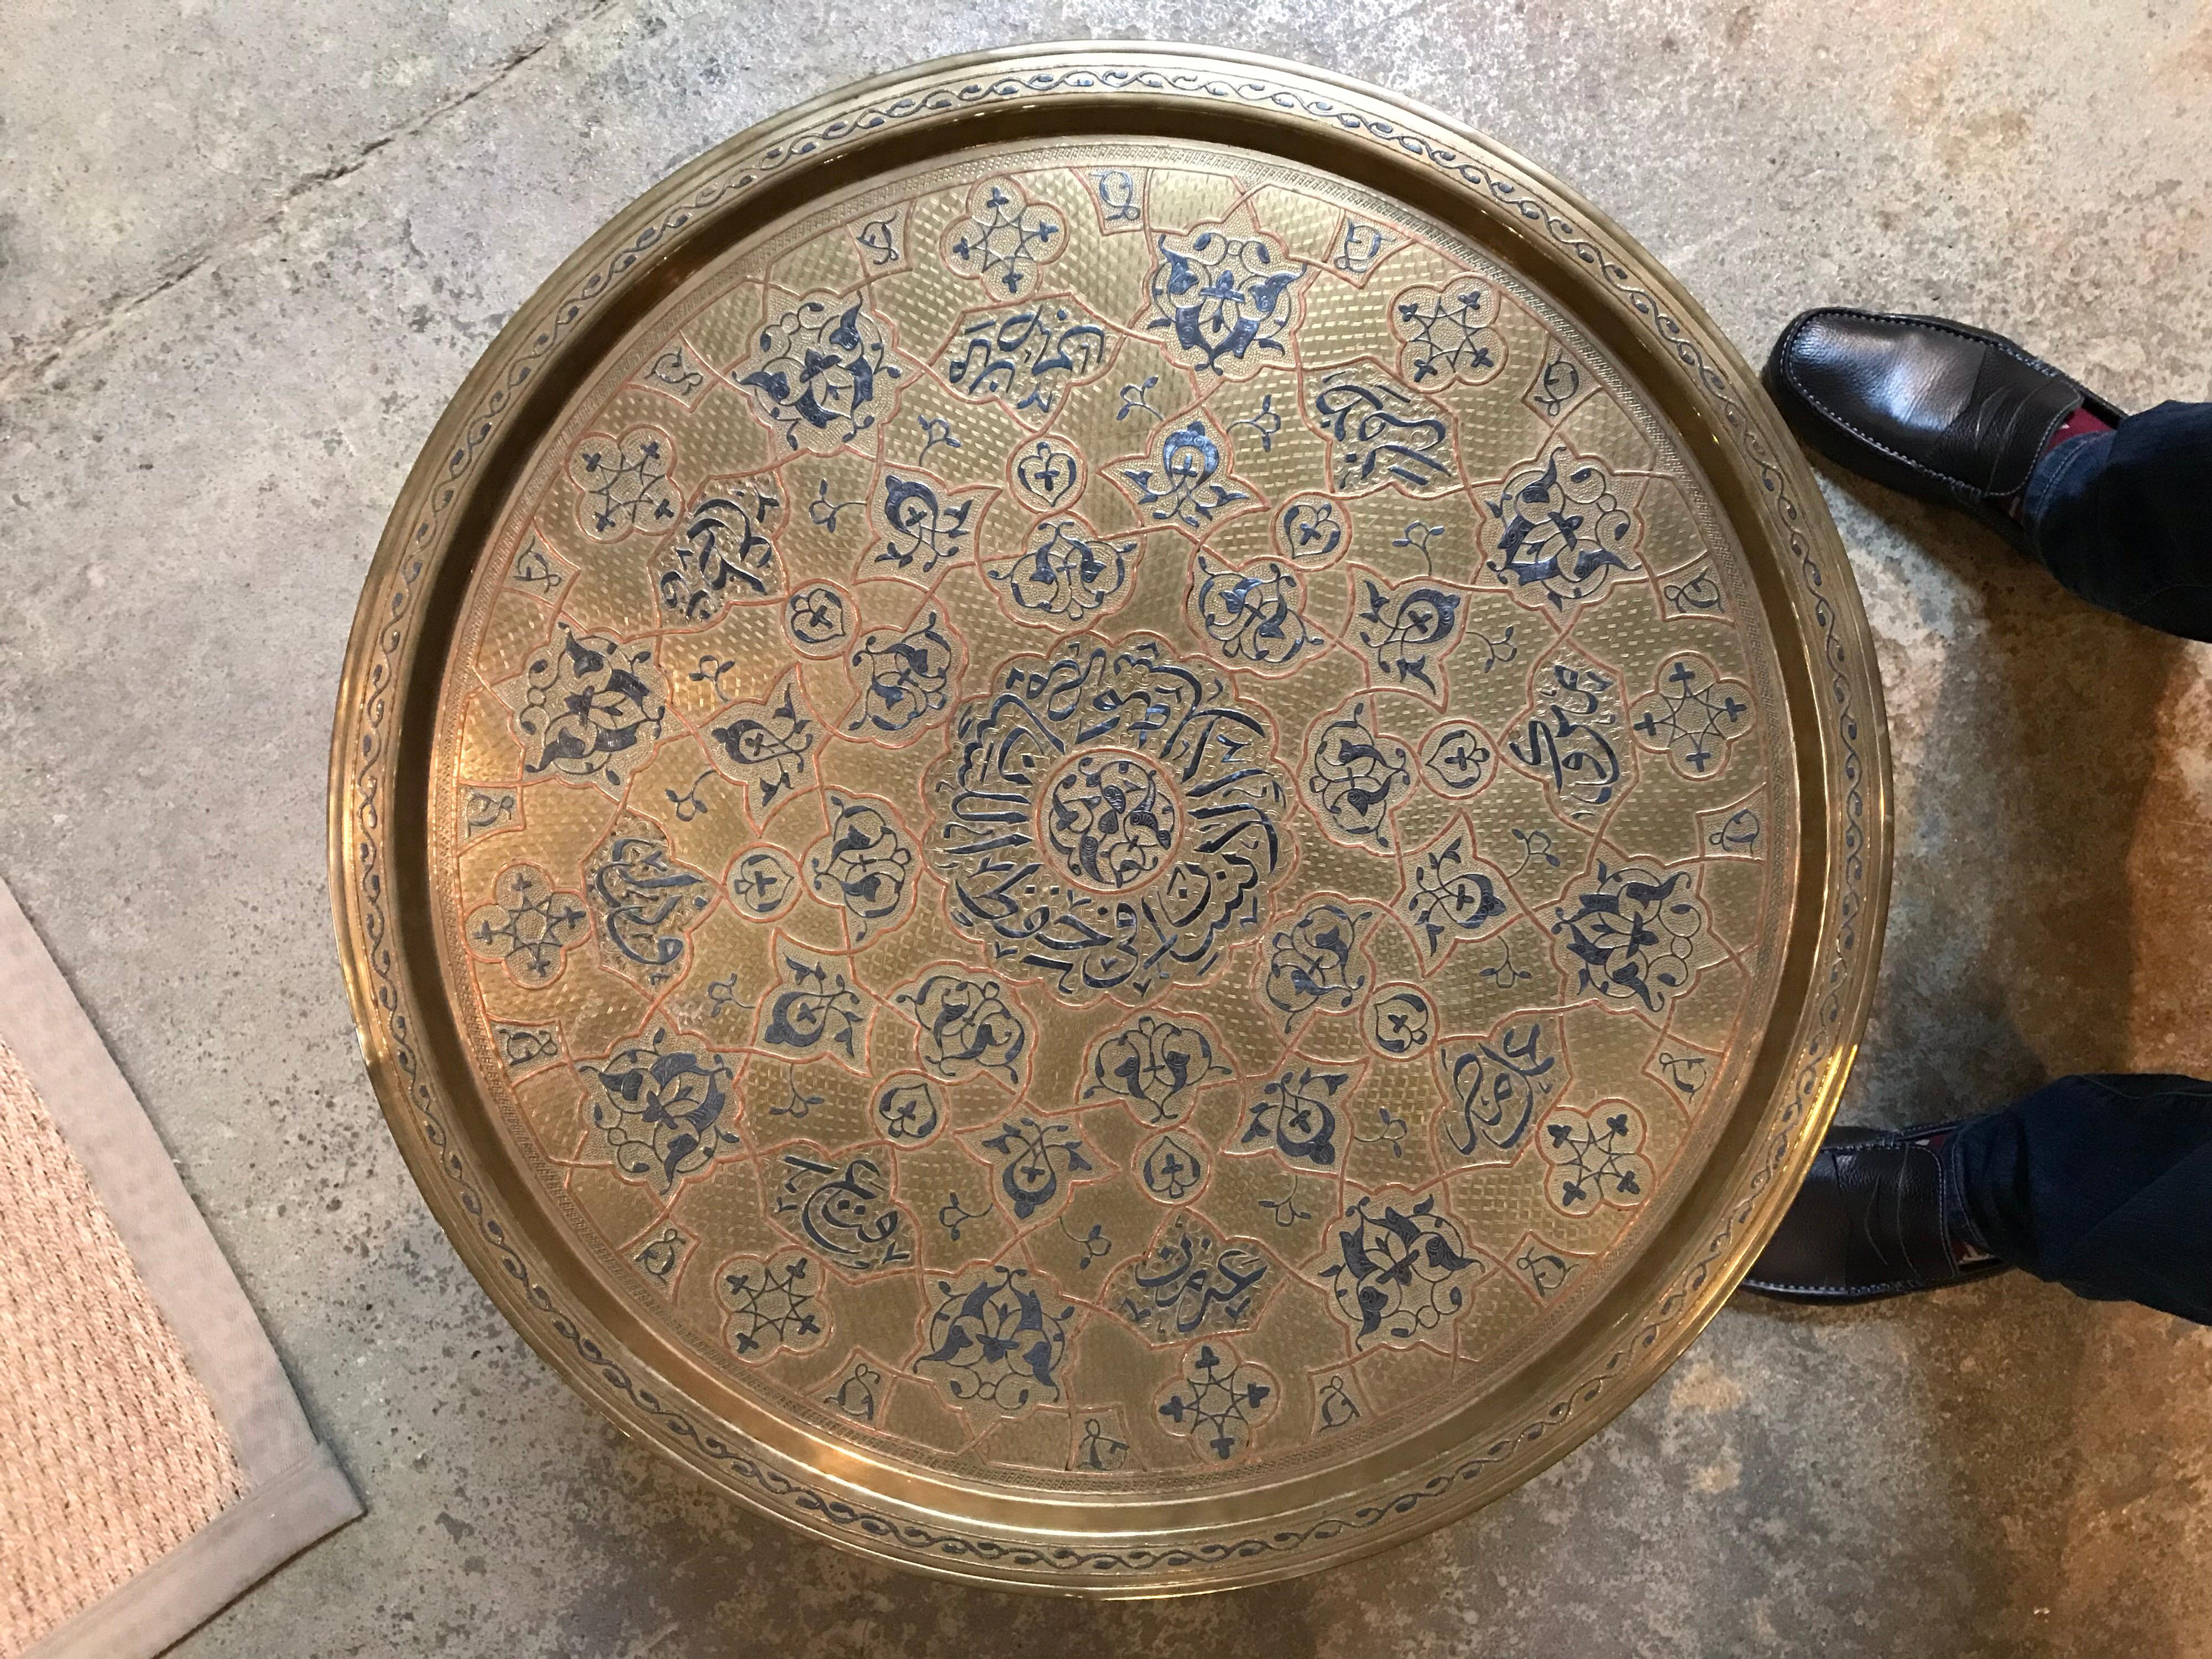 This Anglo-Indian table has a folding base that goes from 6 legs into 2. It was made in the 19th century and includes a round metal tray as the tabletop. The tray has blue patterns with red outlines.